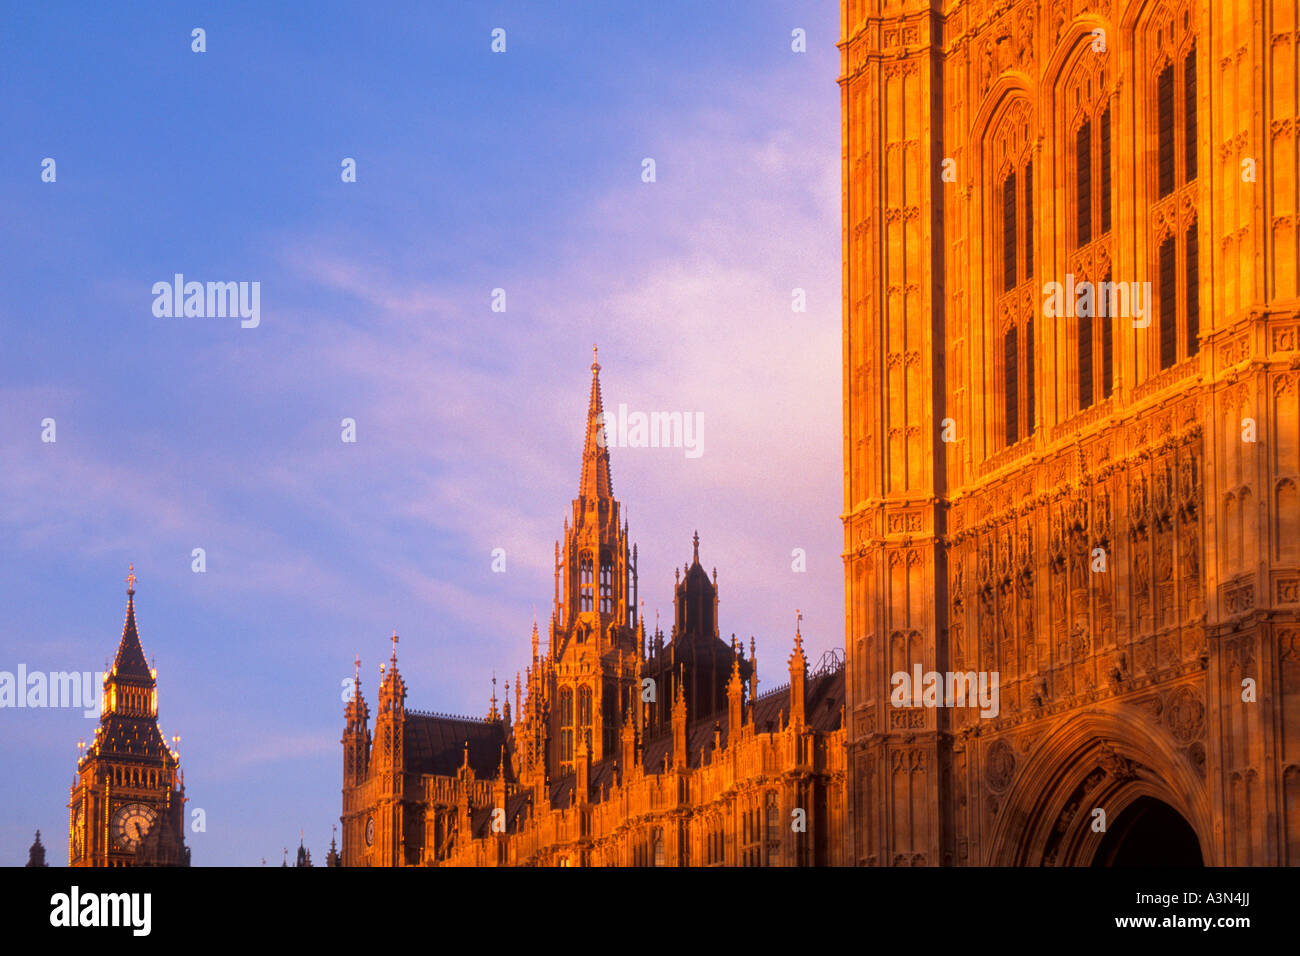 The Houses of Parliament and Big Ben in London, England at sunset. Government building and historic landmark in the UK, United Kingdom, Great Britain Stock Photo